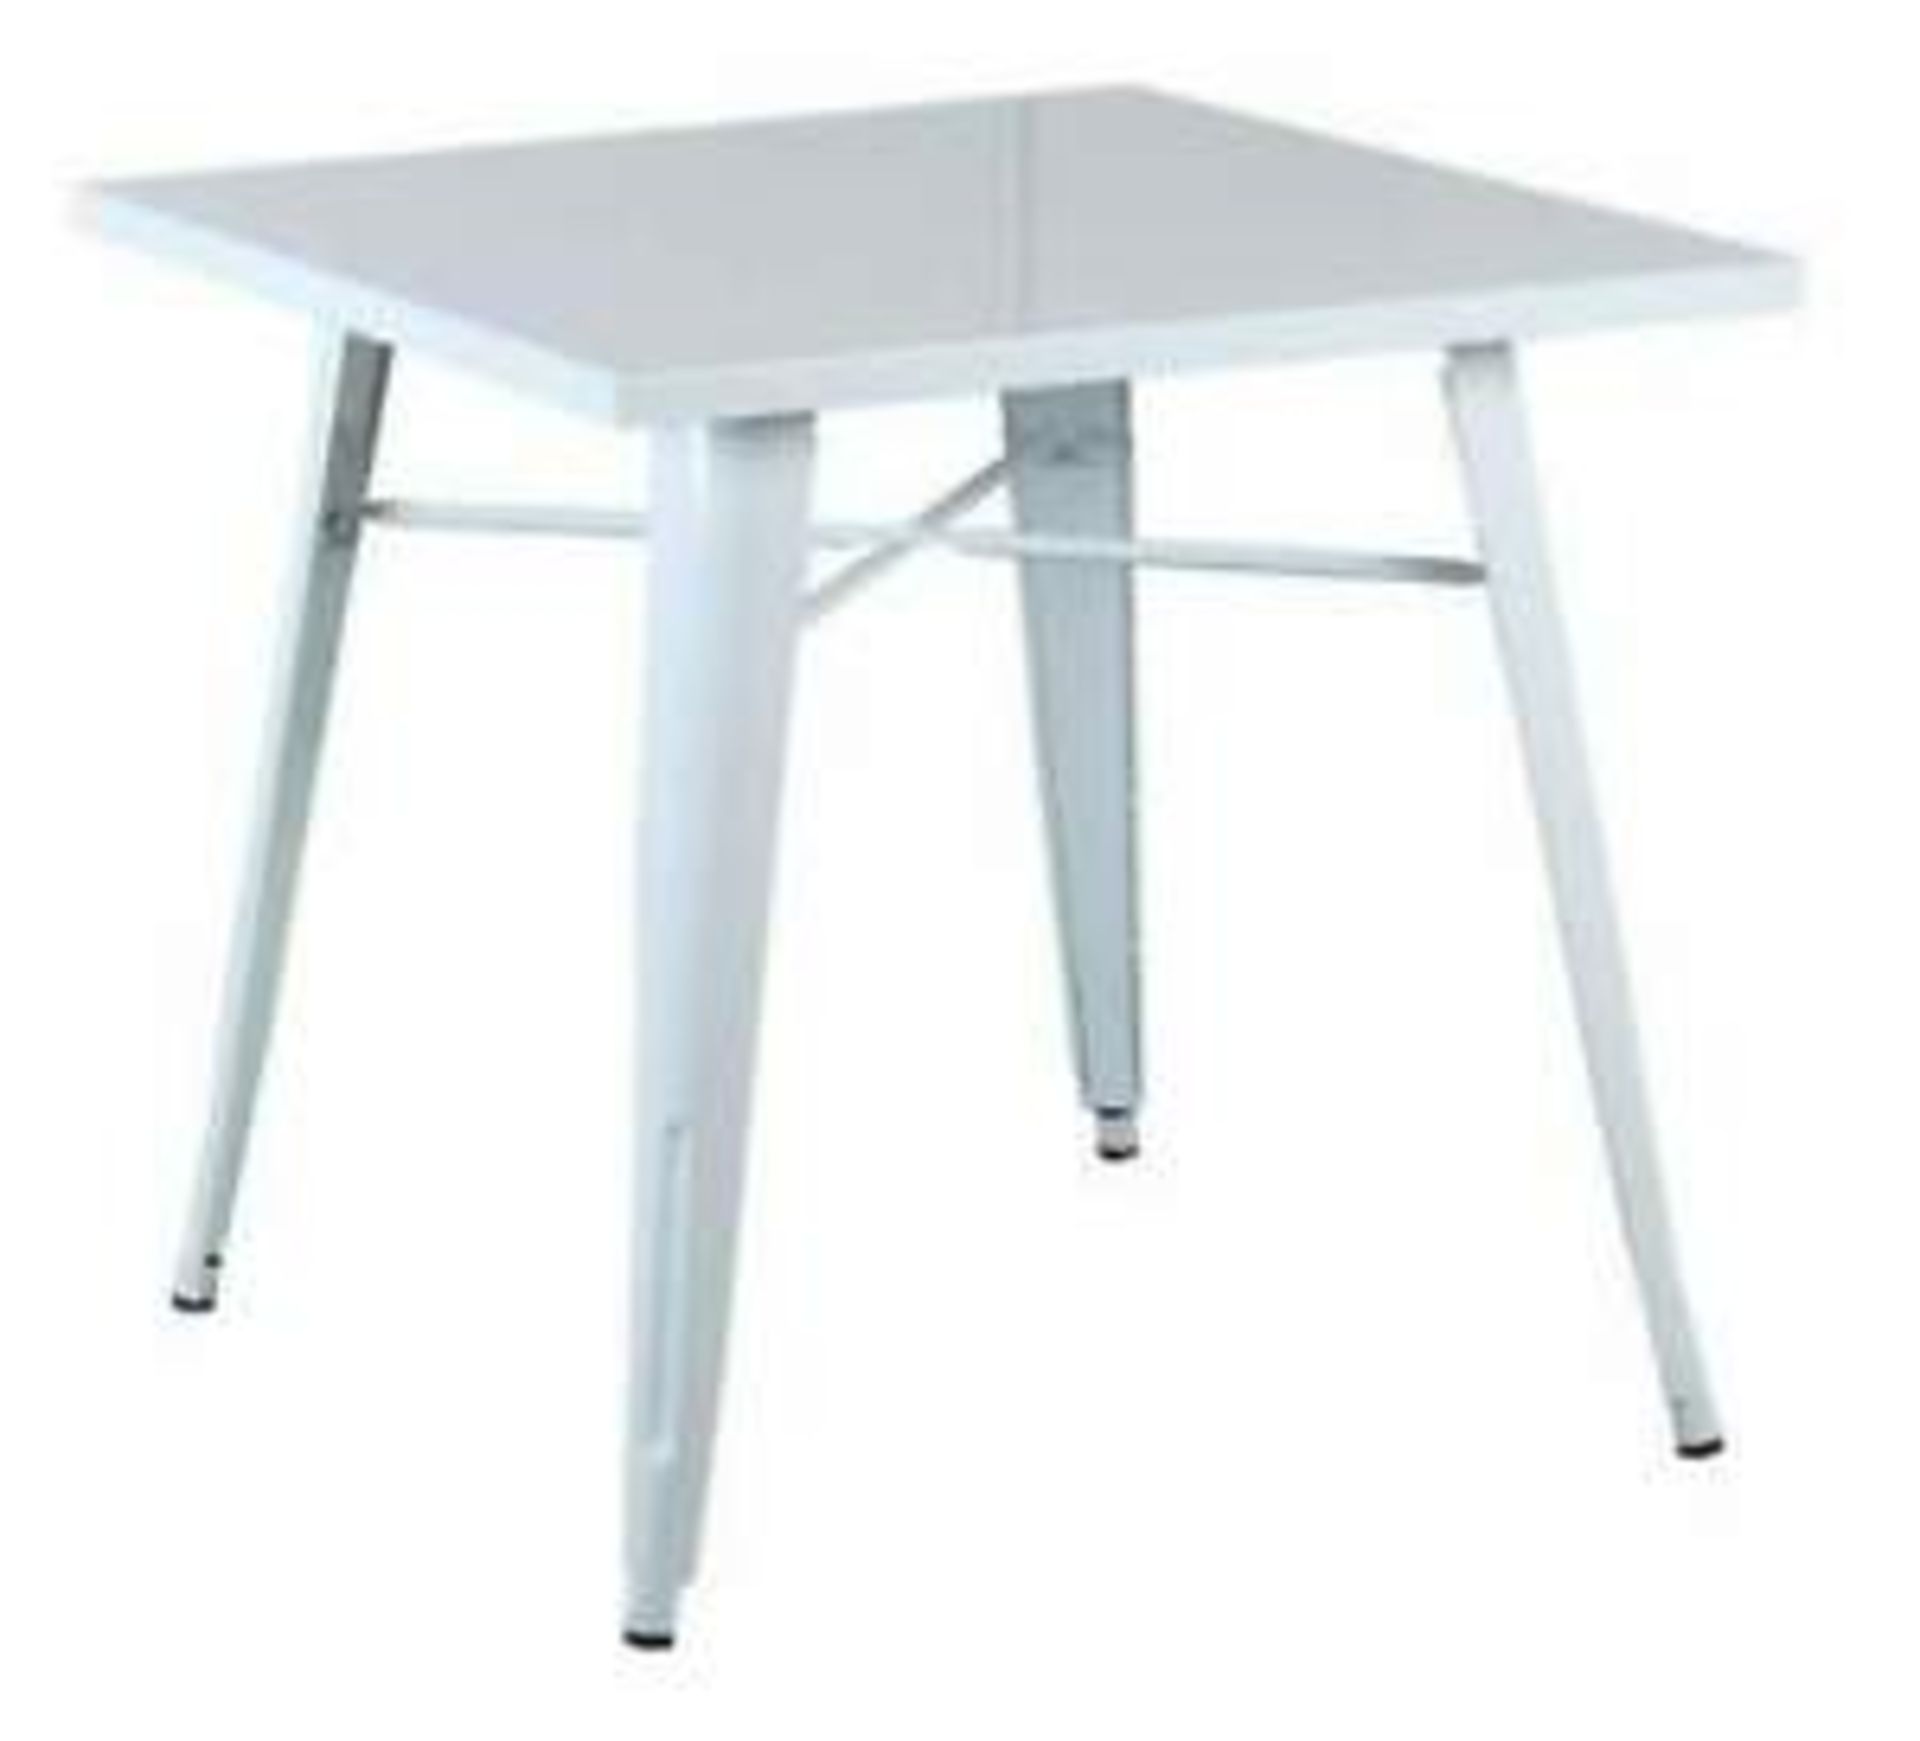 1 x Tolix Industrial Style Outdoor Bistro Table and Chair Set in White- Includes 1 x Table and 4 x - Image 4 of 14